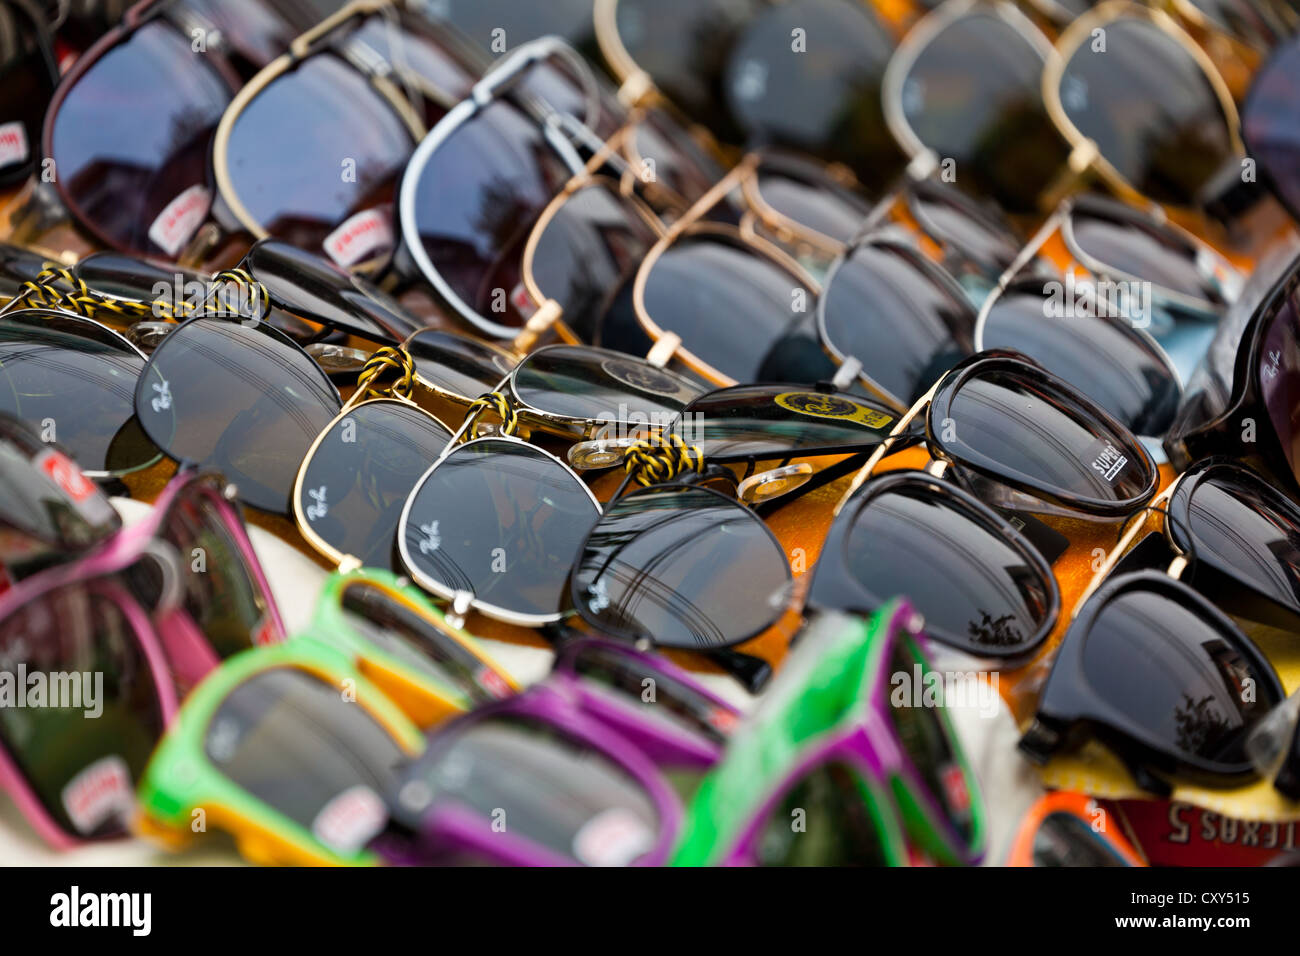 Sale of Sunglasses on a Market in Bangkok, Thailand Stock Photo - Alamy